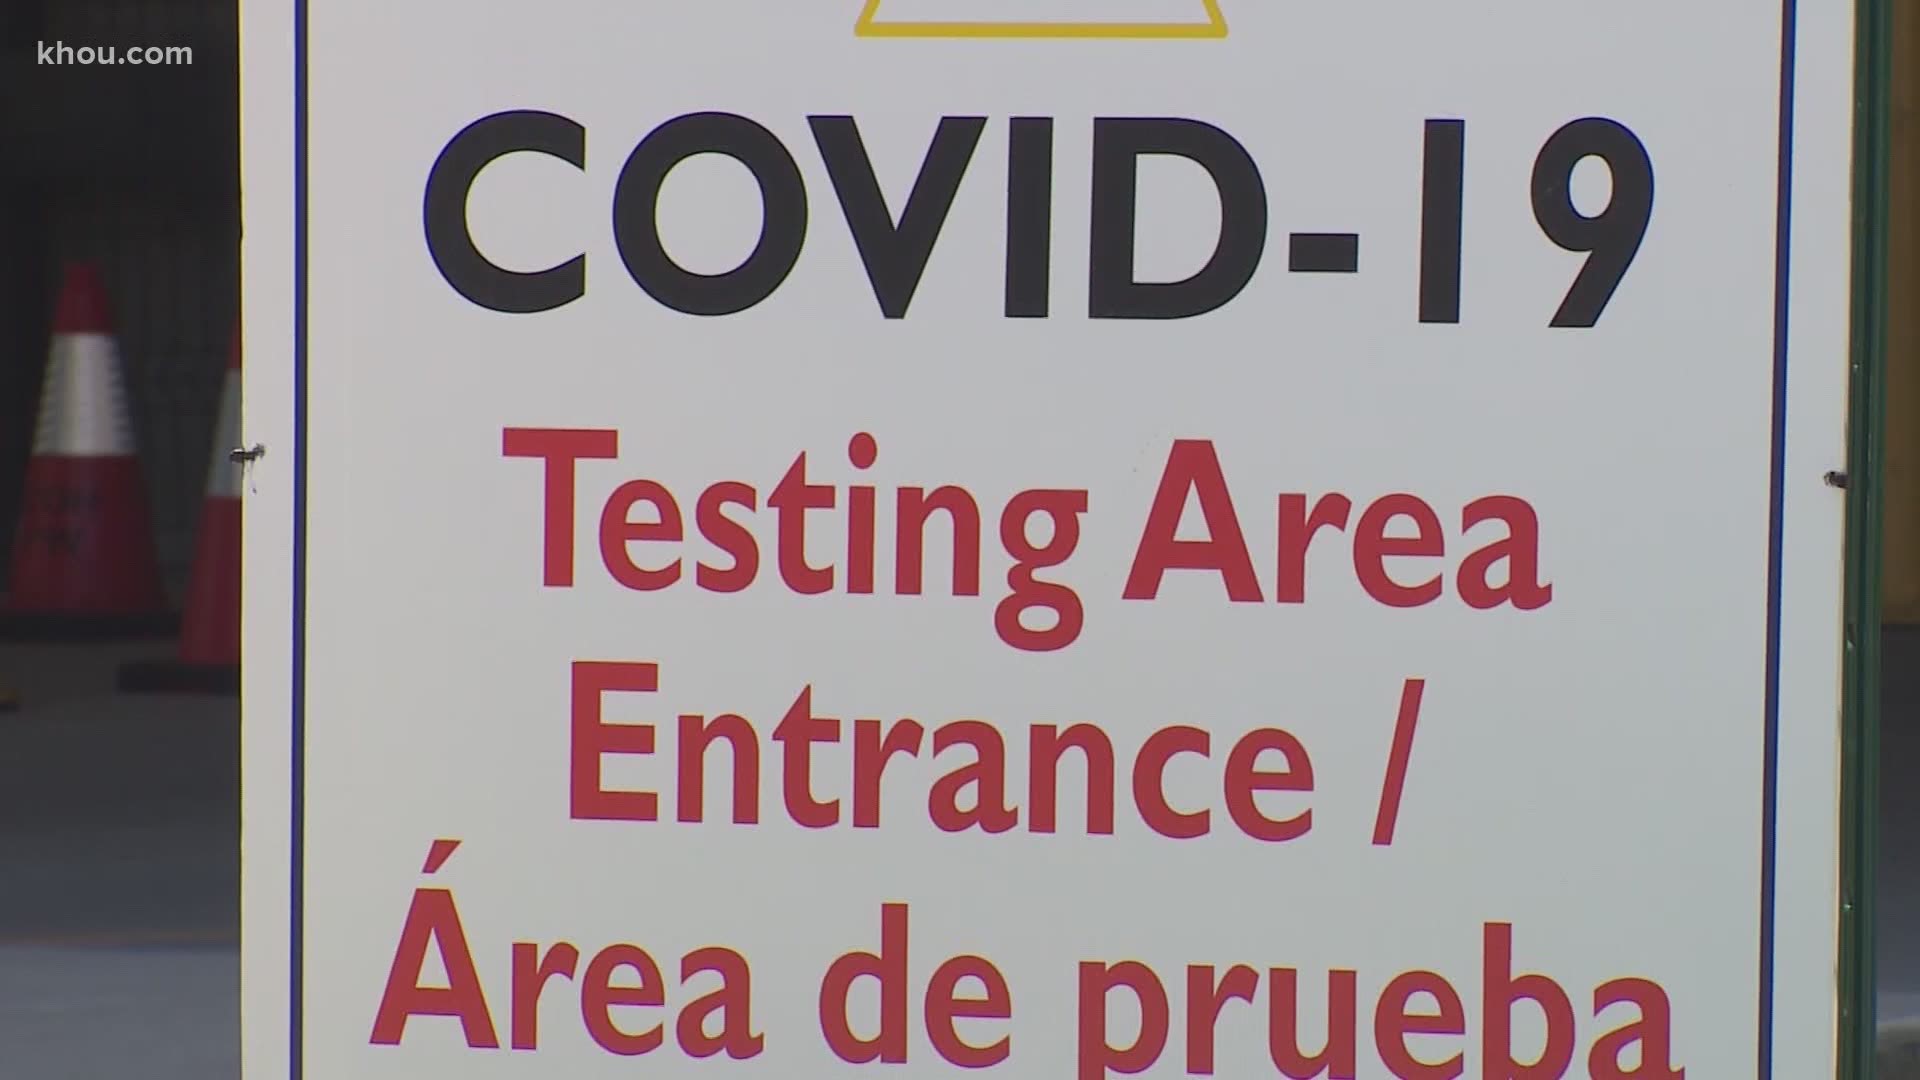 The city plans to have 24 testing sites by the end of the month and hire 300 more contact tracers.